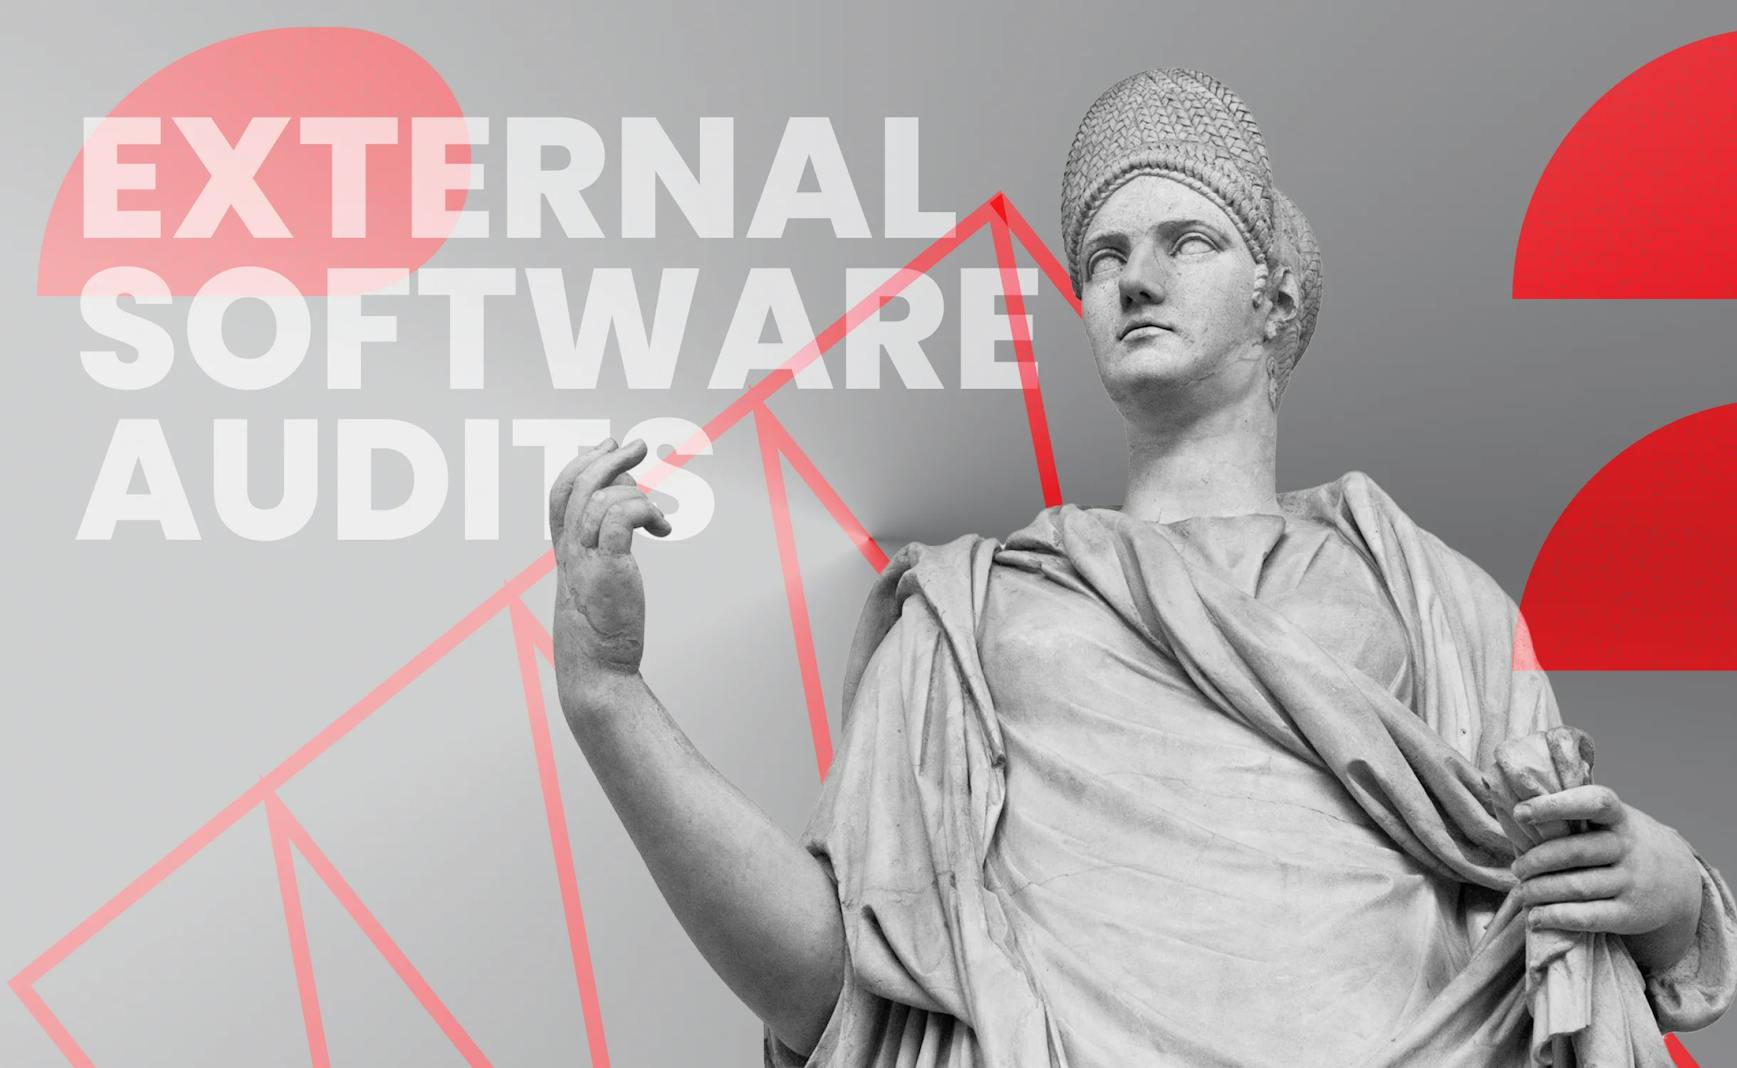 Internal and External Software Audits: What Are They and Why Are They Important?